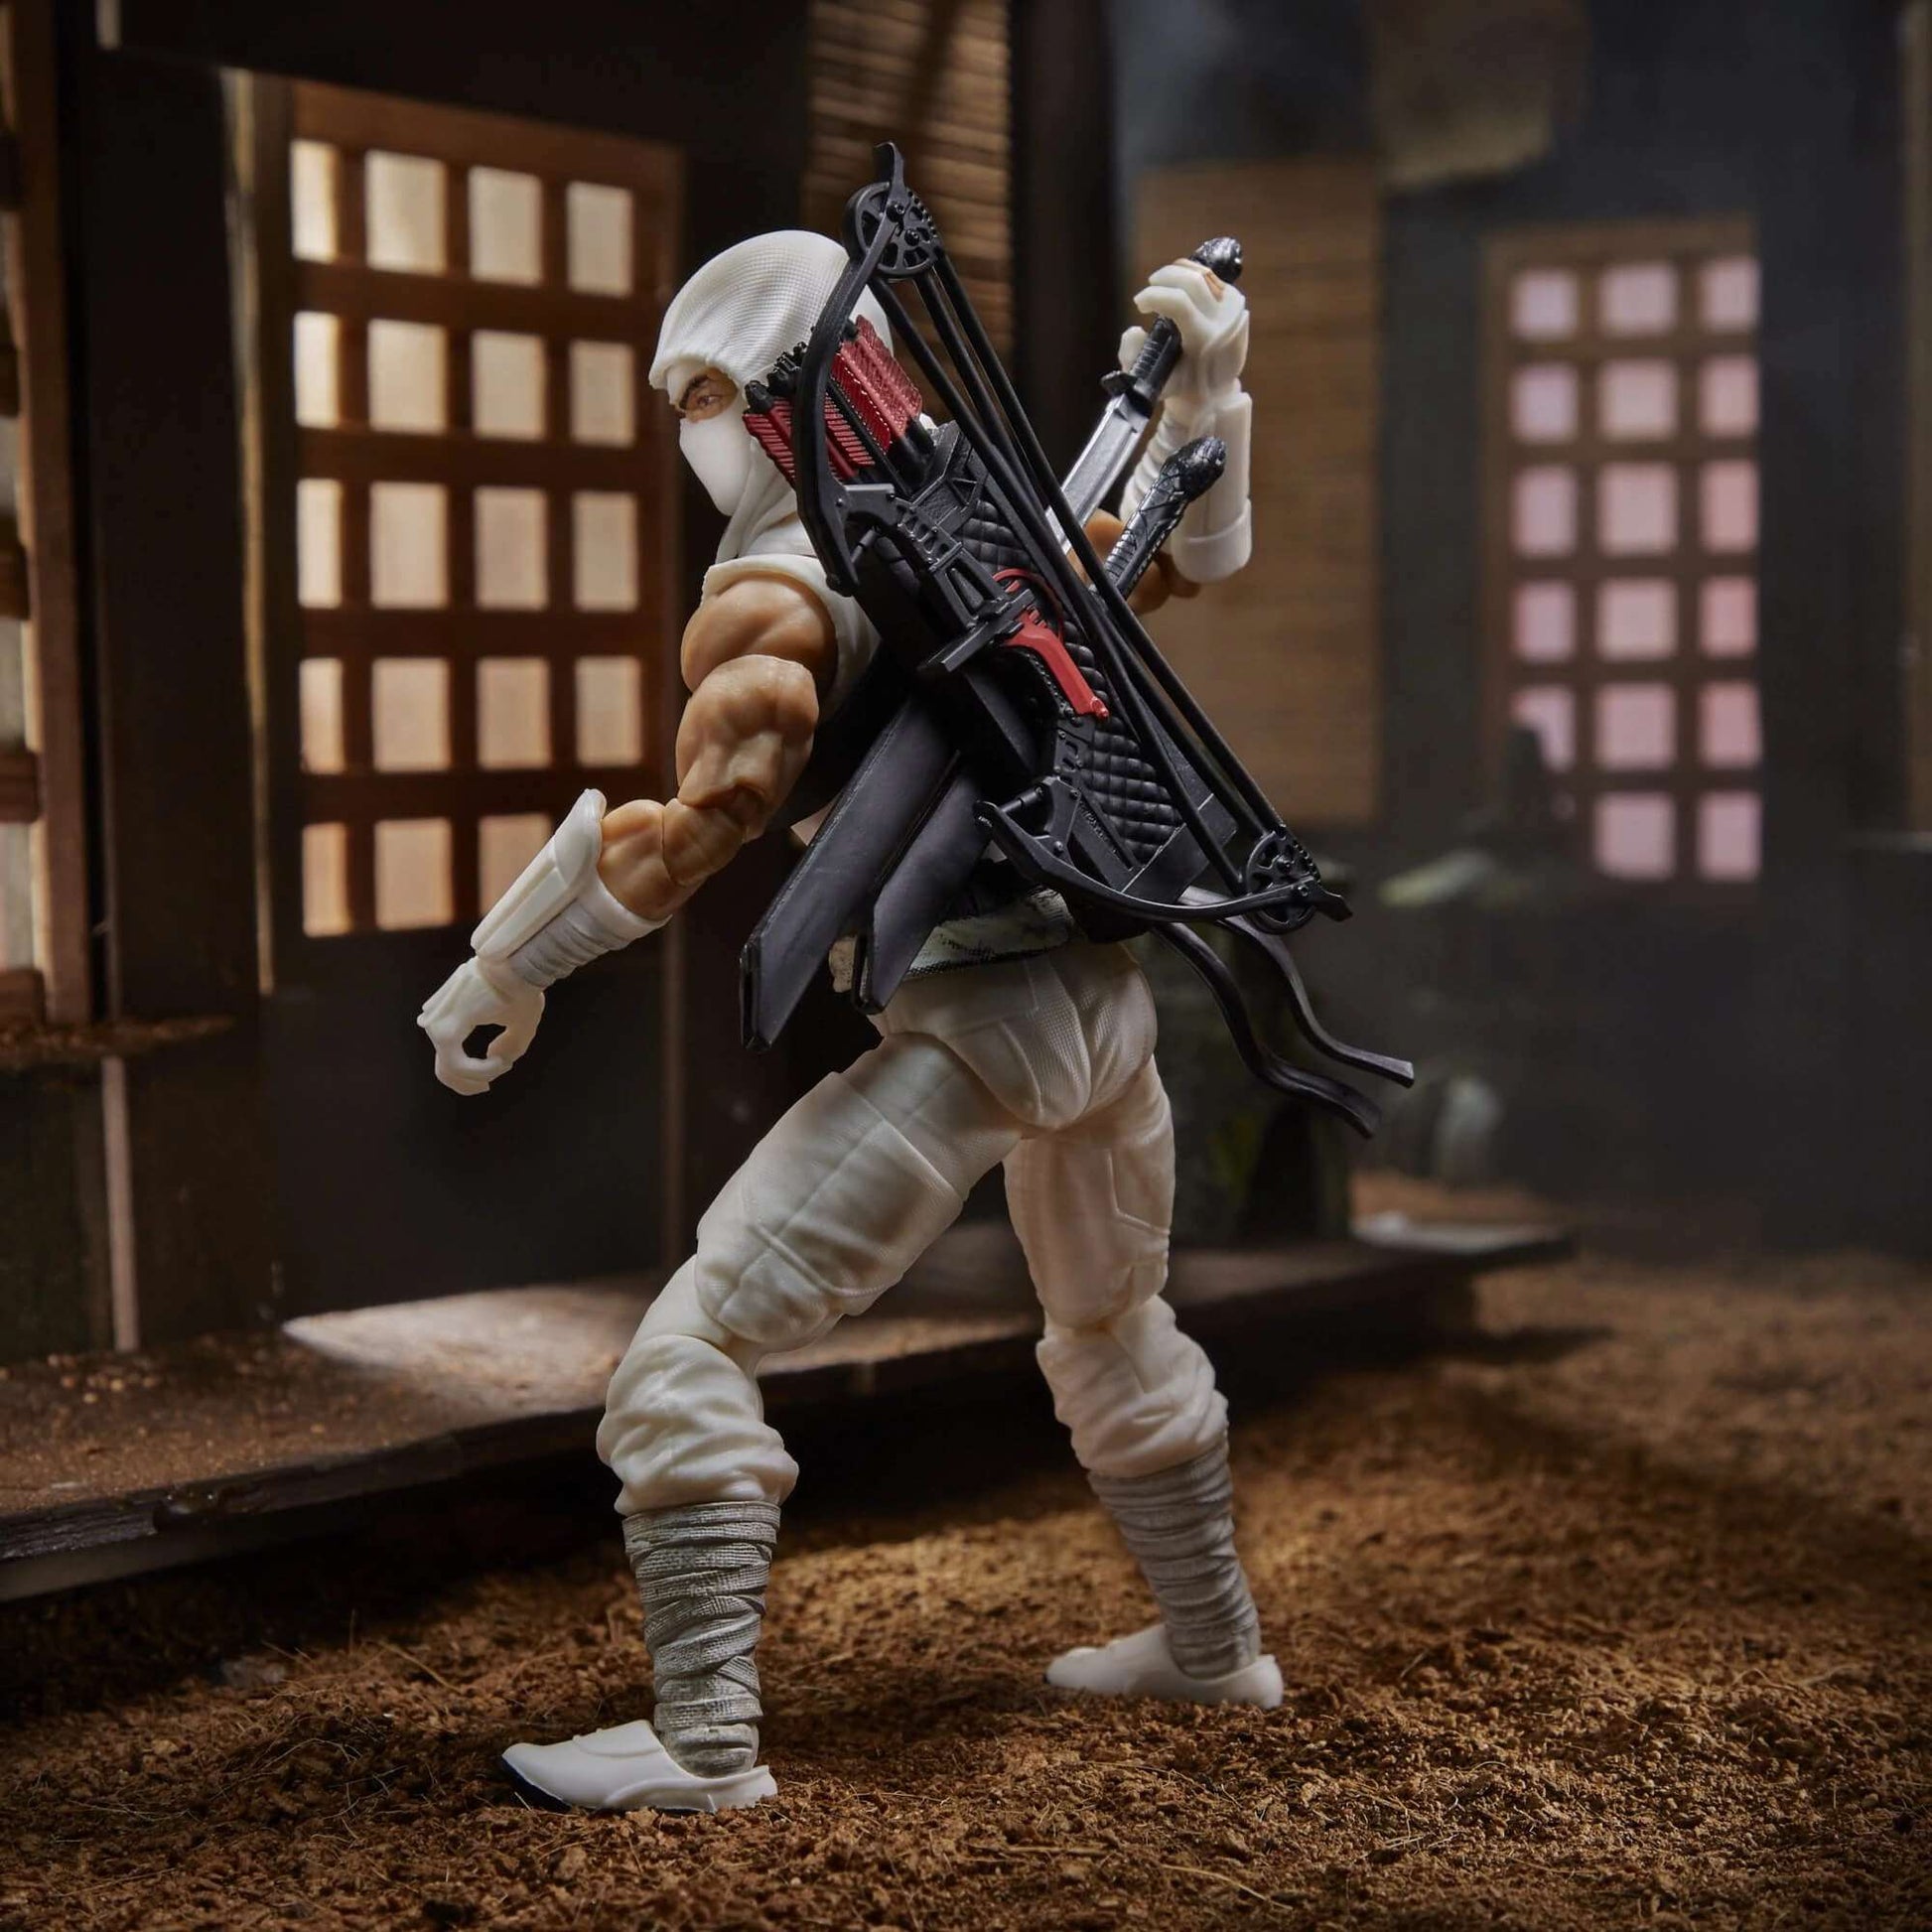 Hasbro G.I. Joe Classified Series Storm Shadow action figure  with accessories